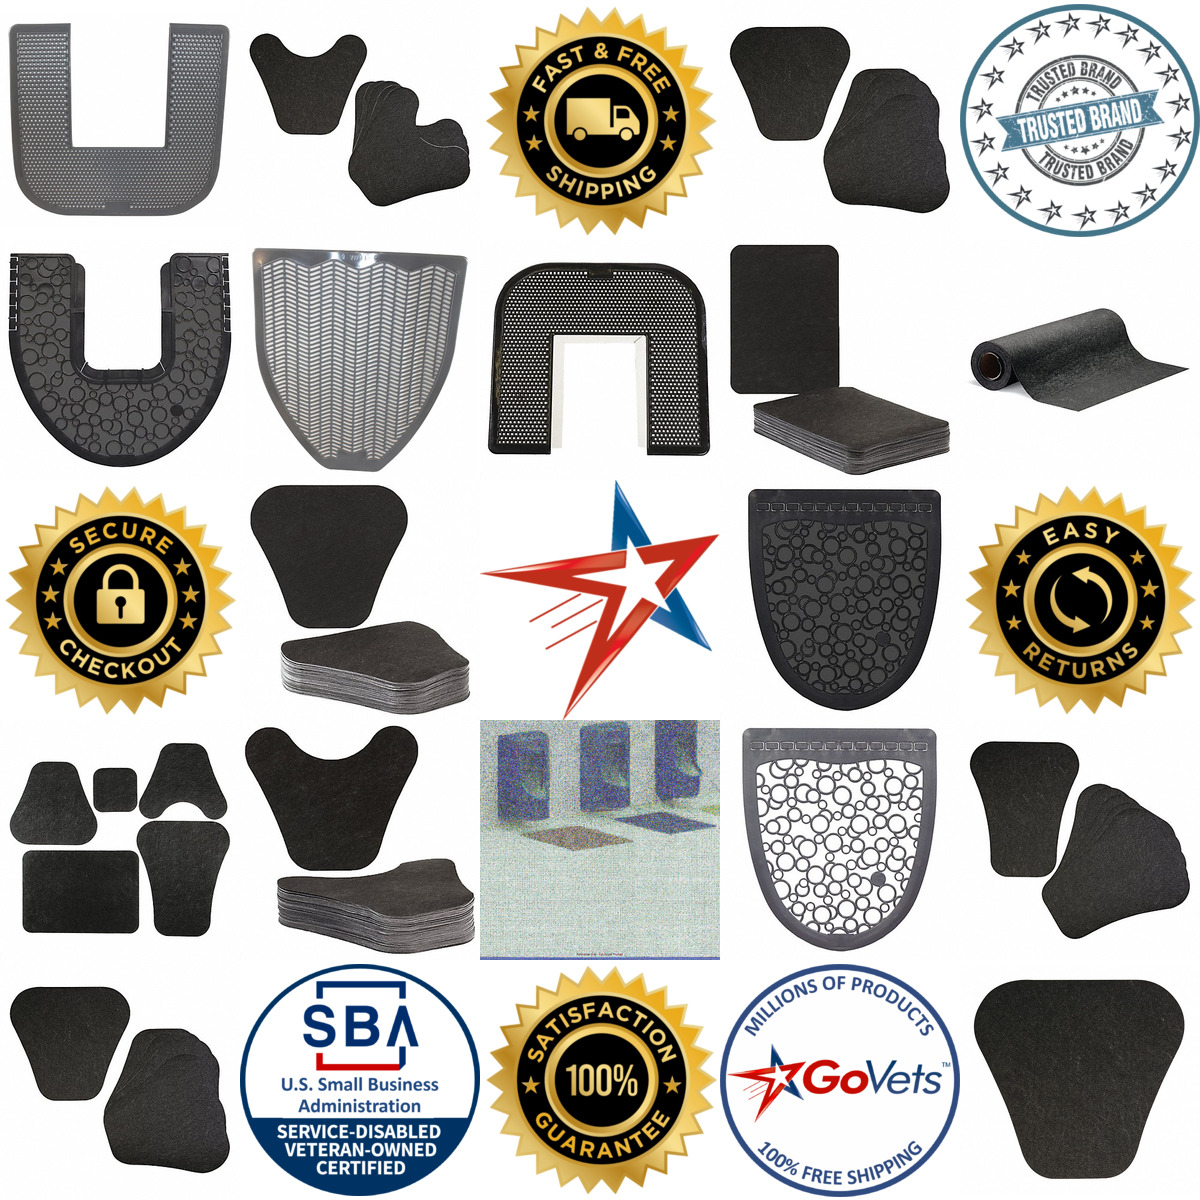 A selection of Toilet and Urinal Mats products on GoVets